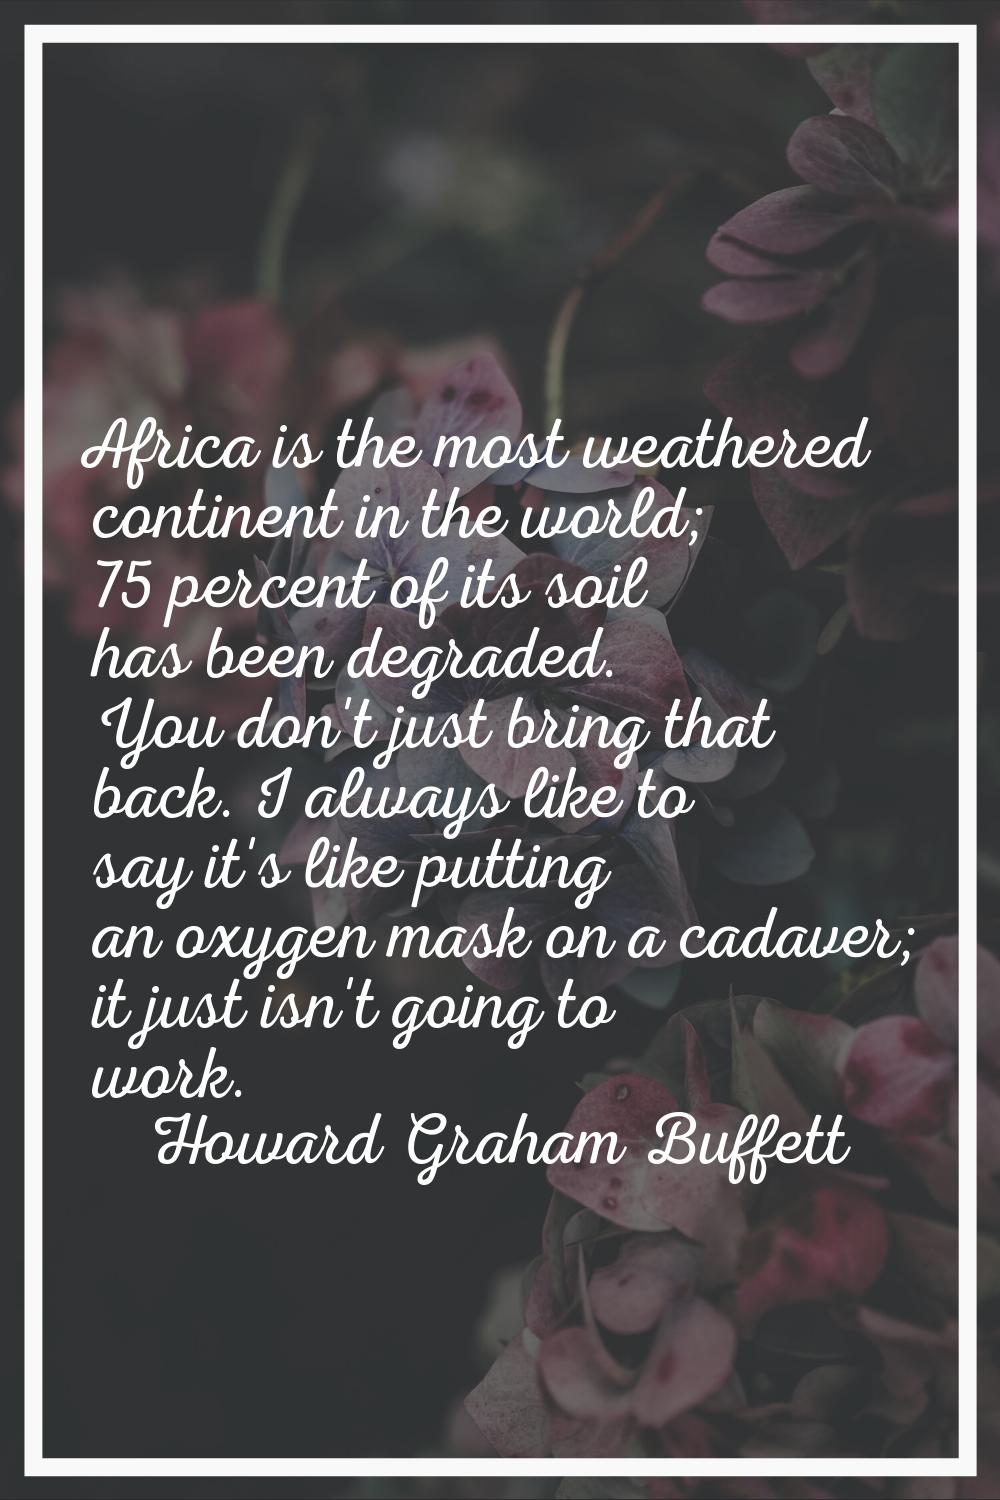 Africa is the most weathered continent in the world; 75 percent of its soil has been degraded. You 